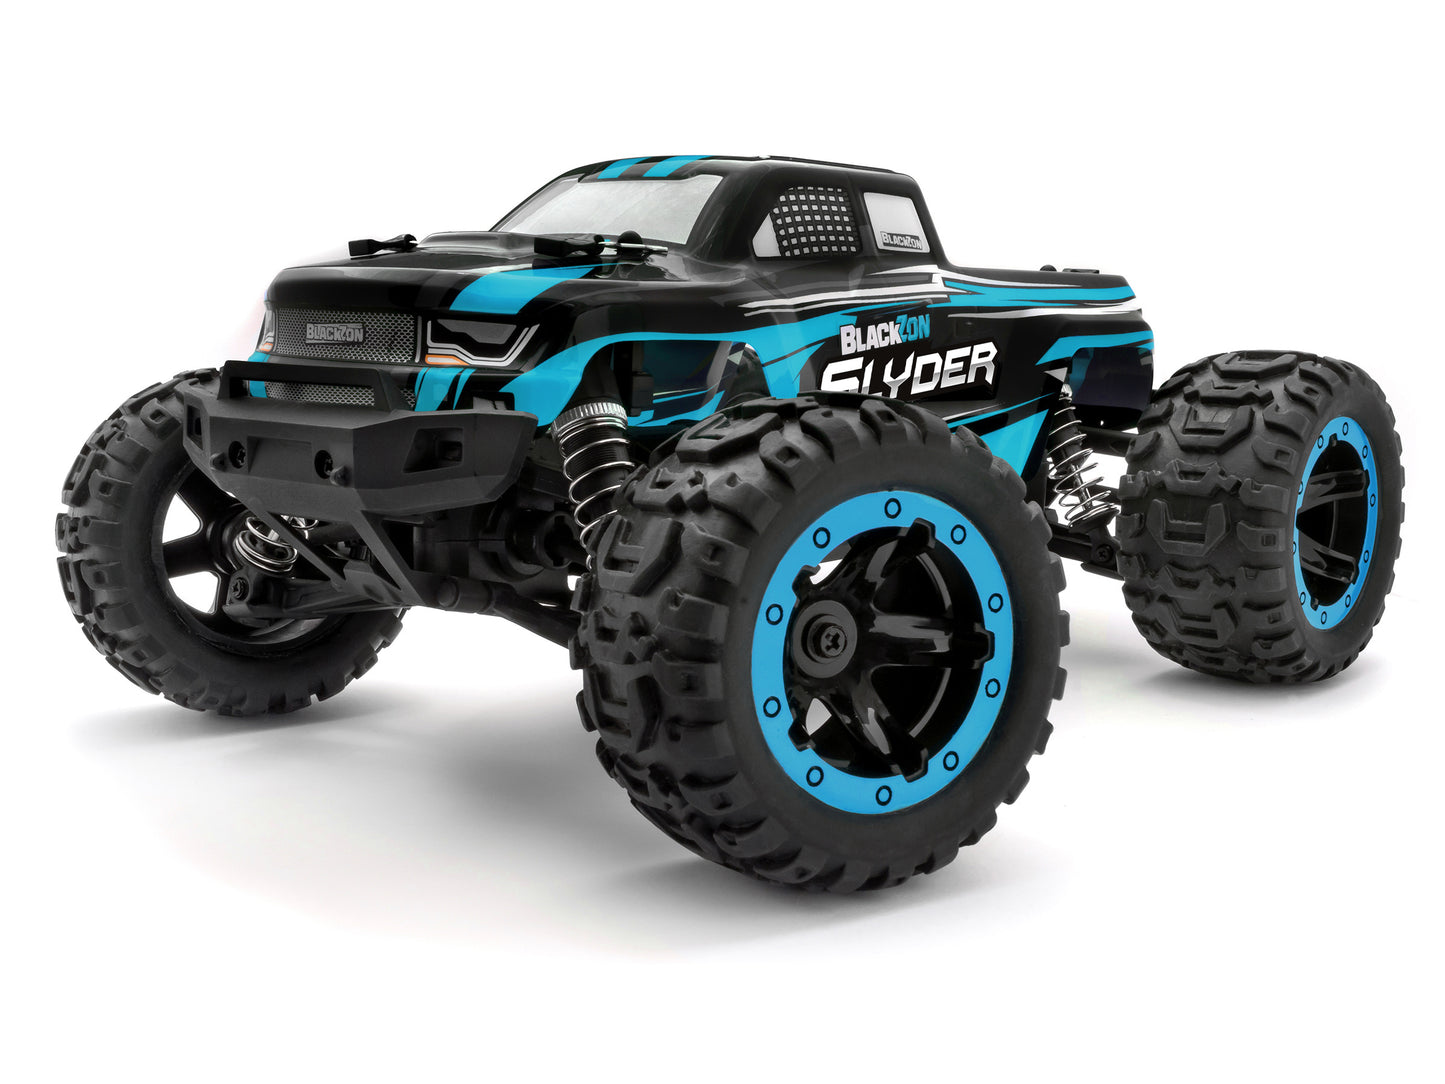 Slyder 1/16th RTR 4WD Electric Monster Truck